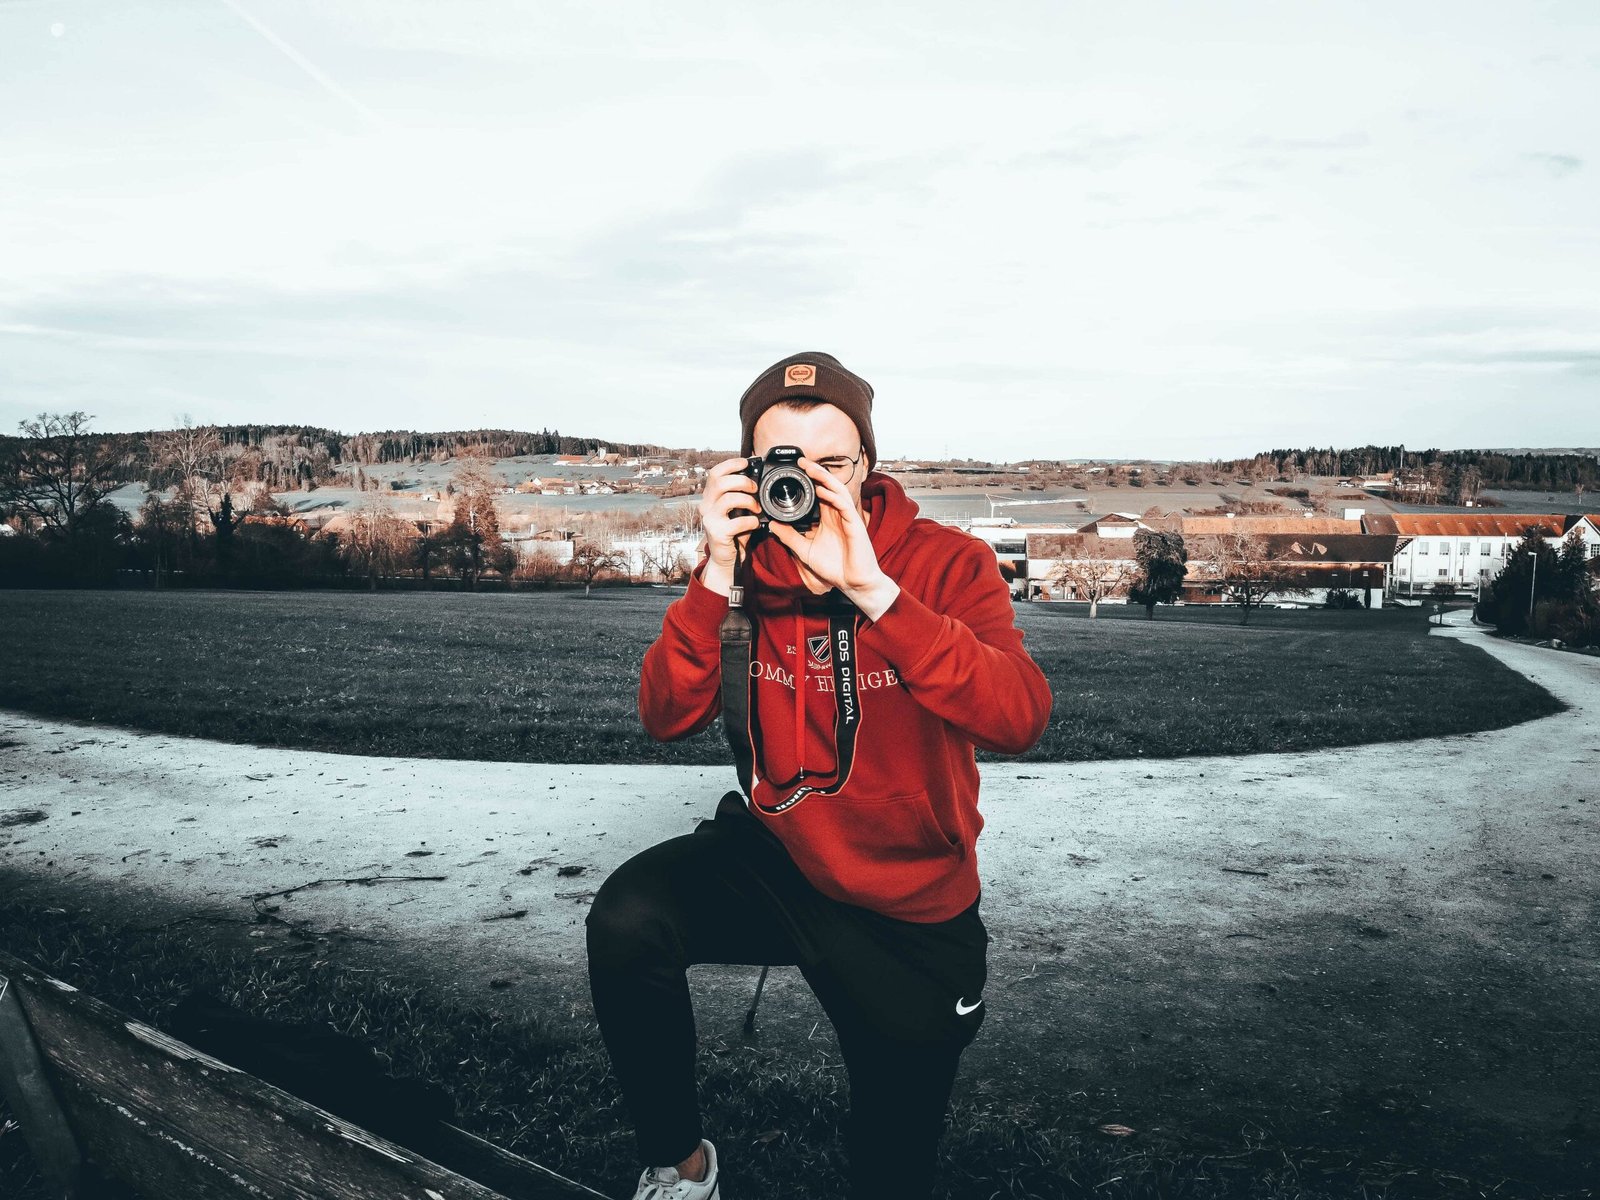 Find Your Photography Style